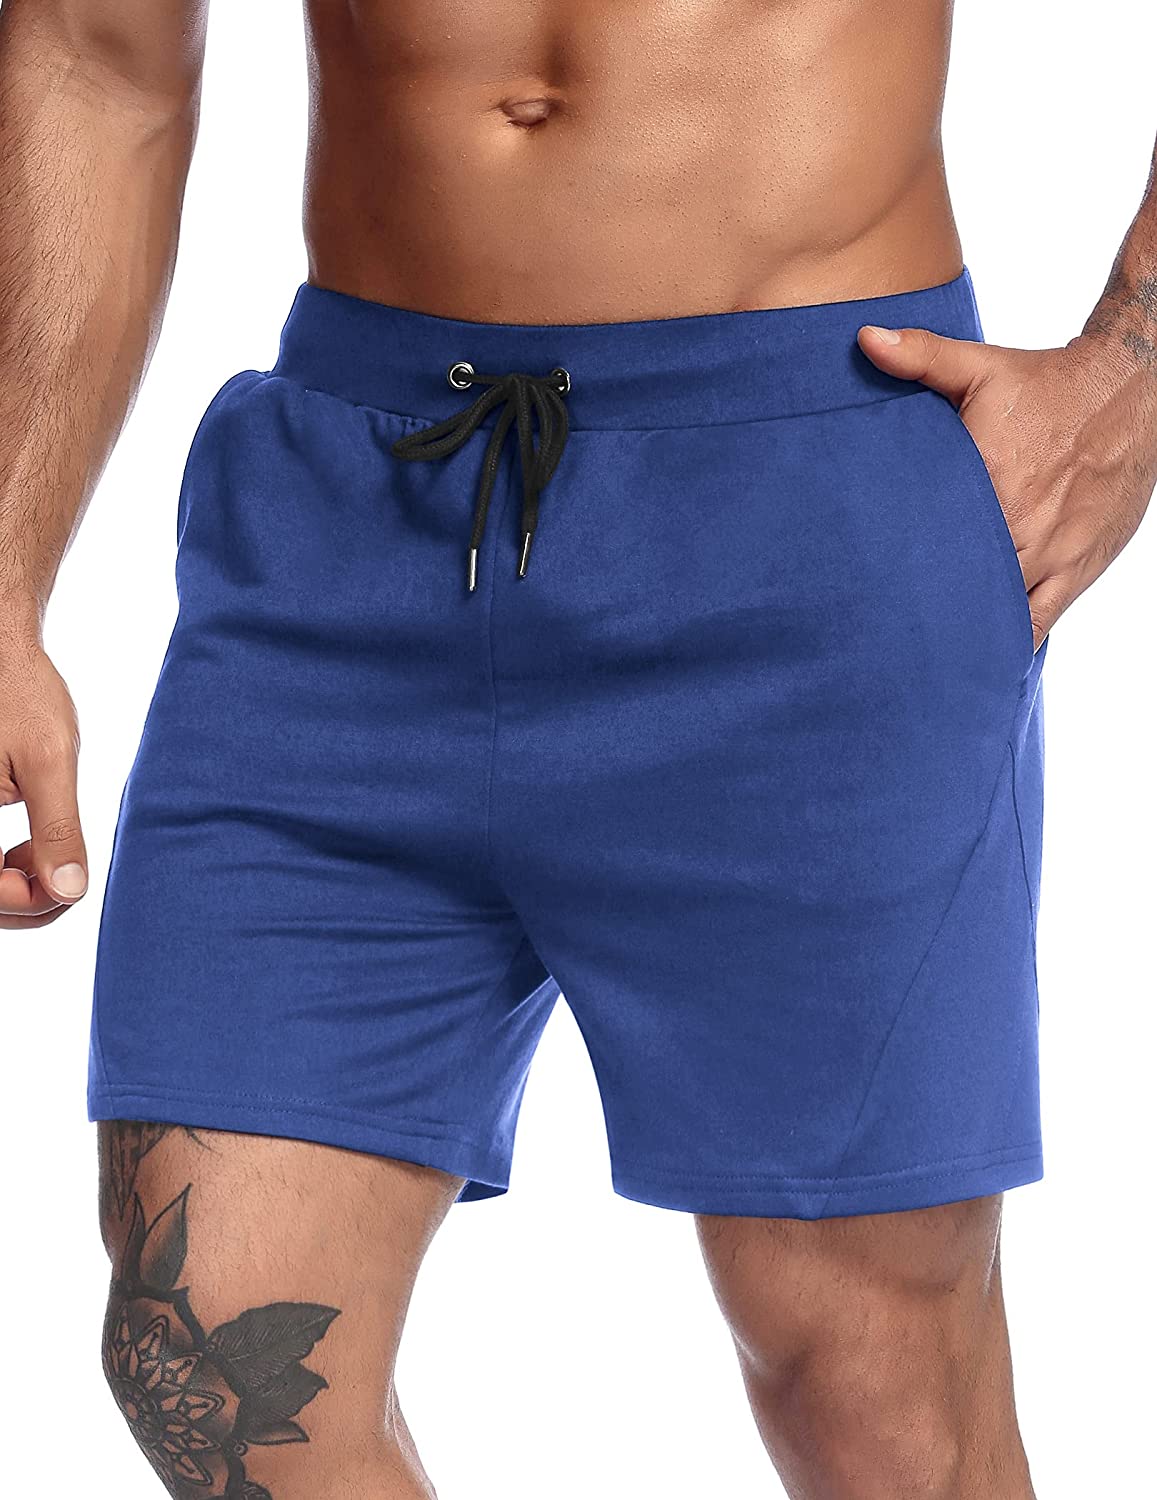 COOFANDY Mens Fitted Workout Shorts Bodybuilding Sporting Running Training Jogger Gym Short Pants with Pockets